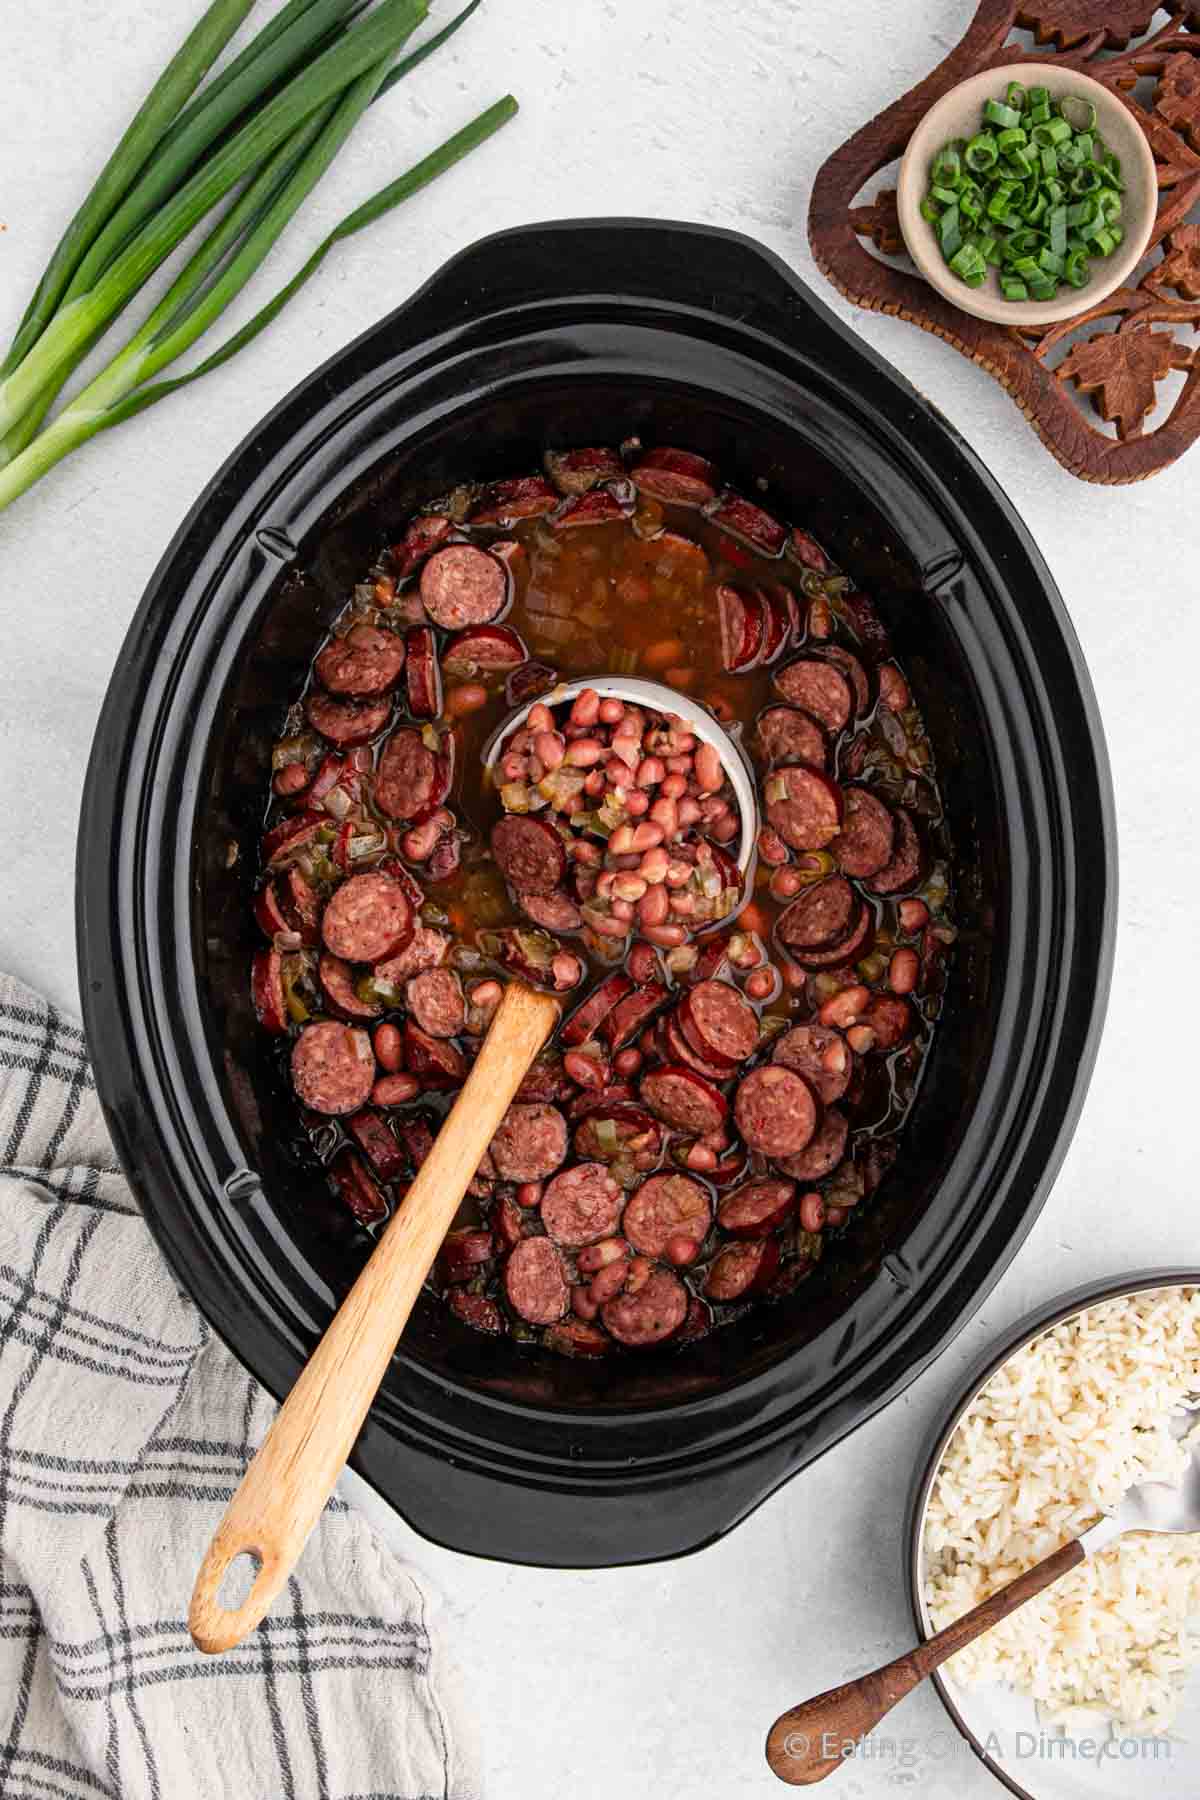 Red beans and rice in the slow cooker with a serving on a ladle